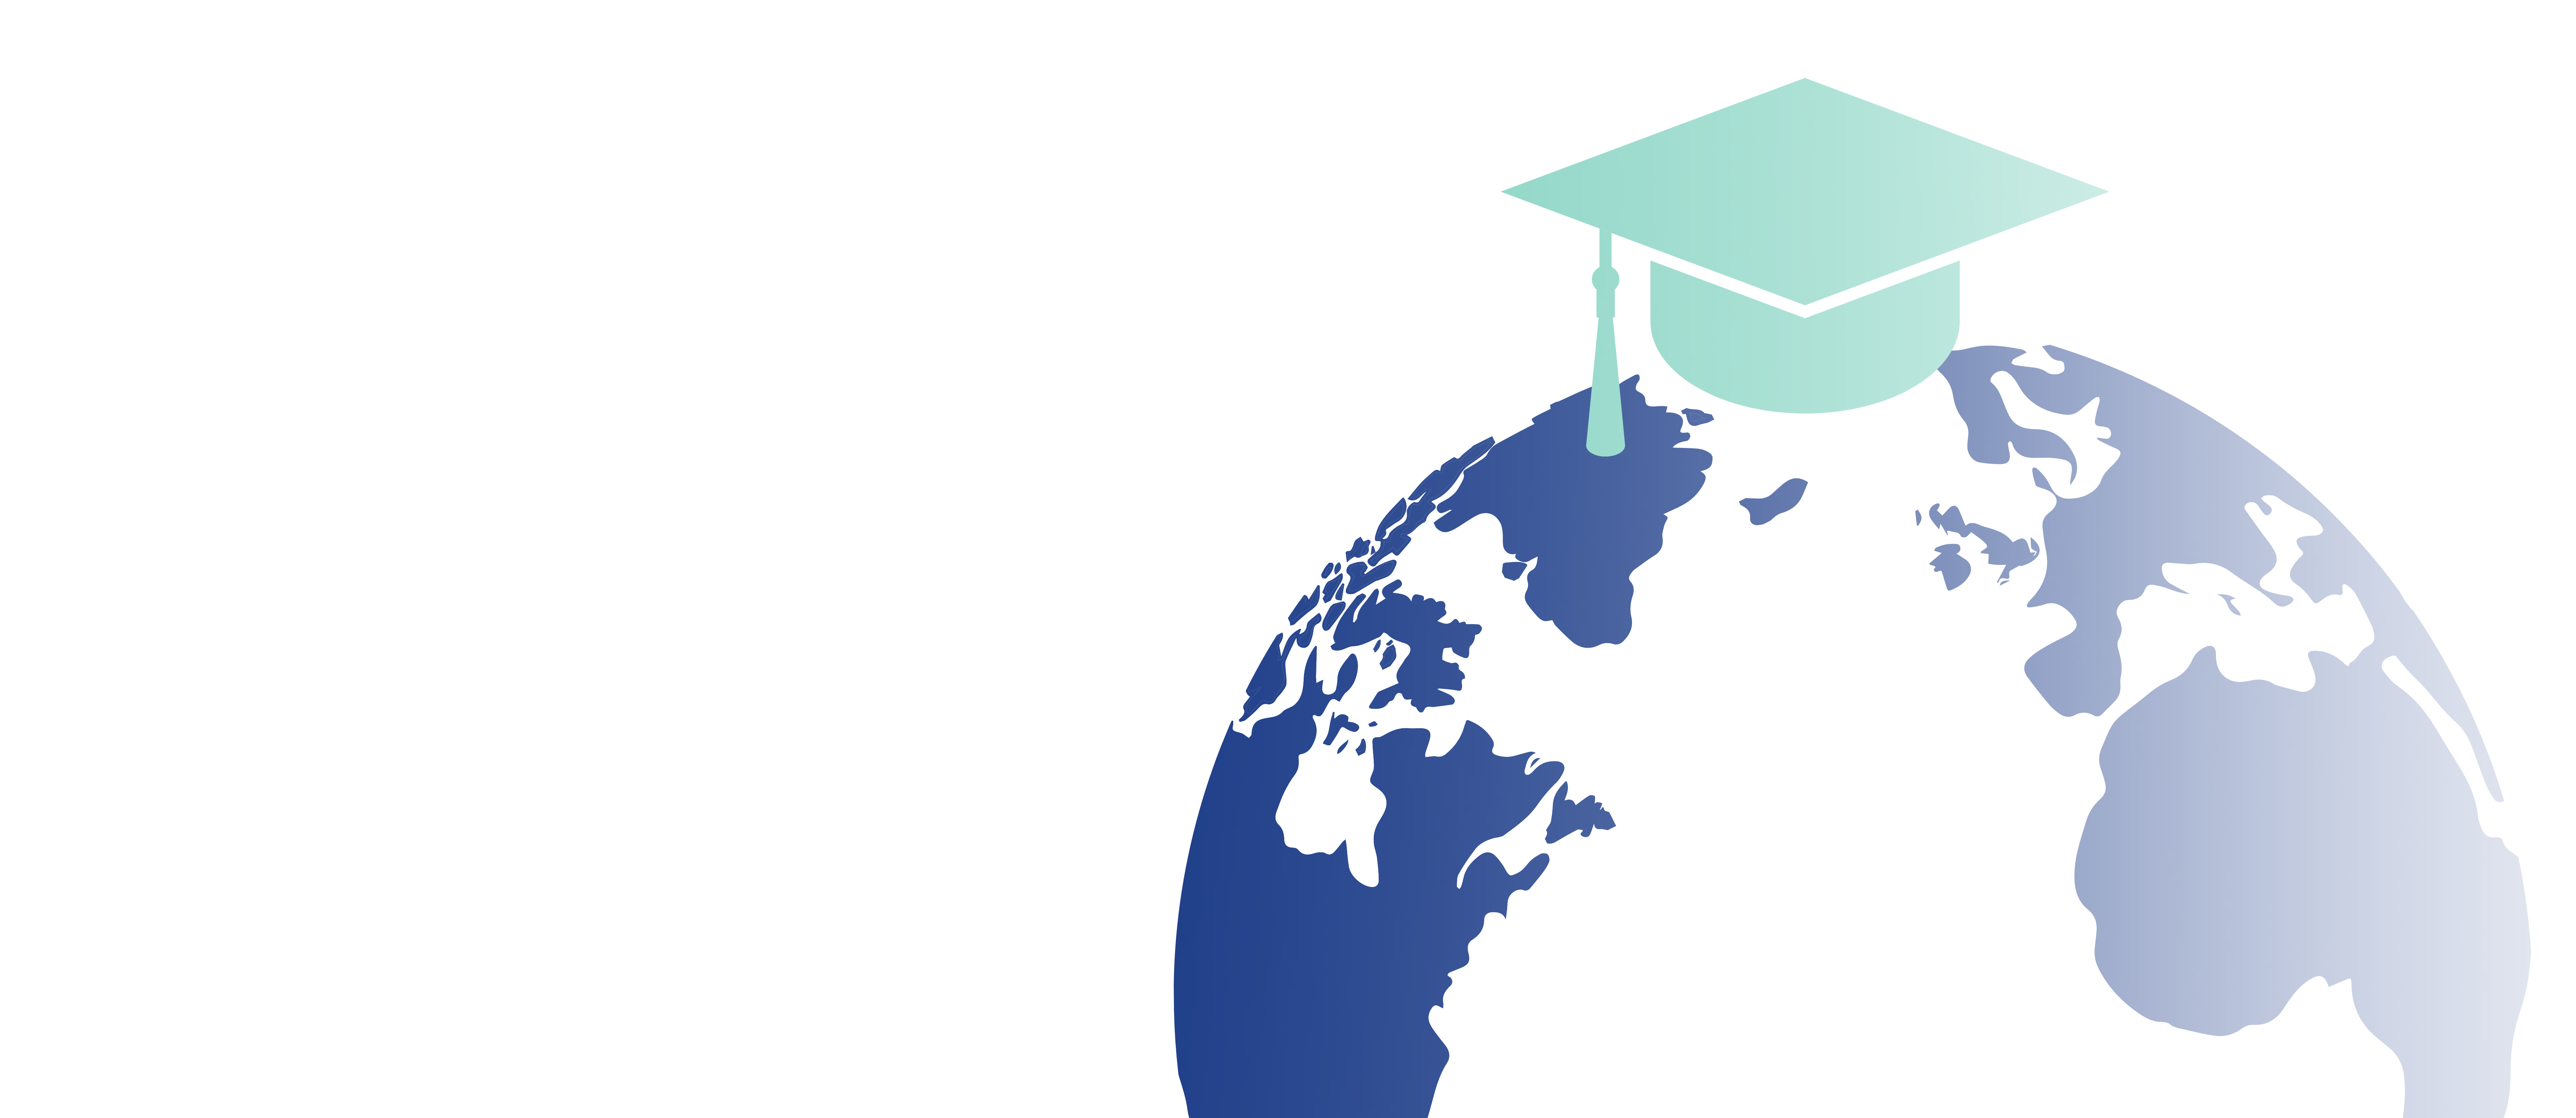 Image of a globe with a graduation cap on top.